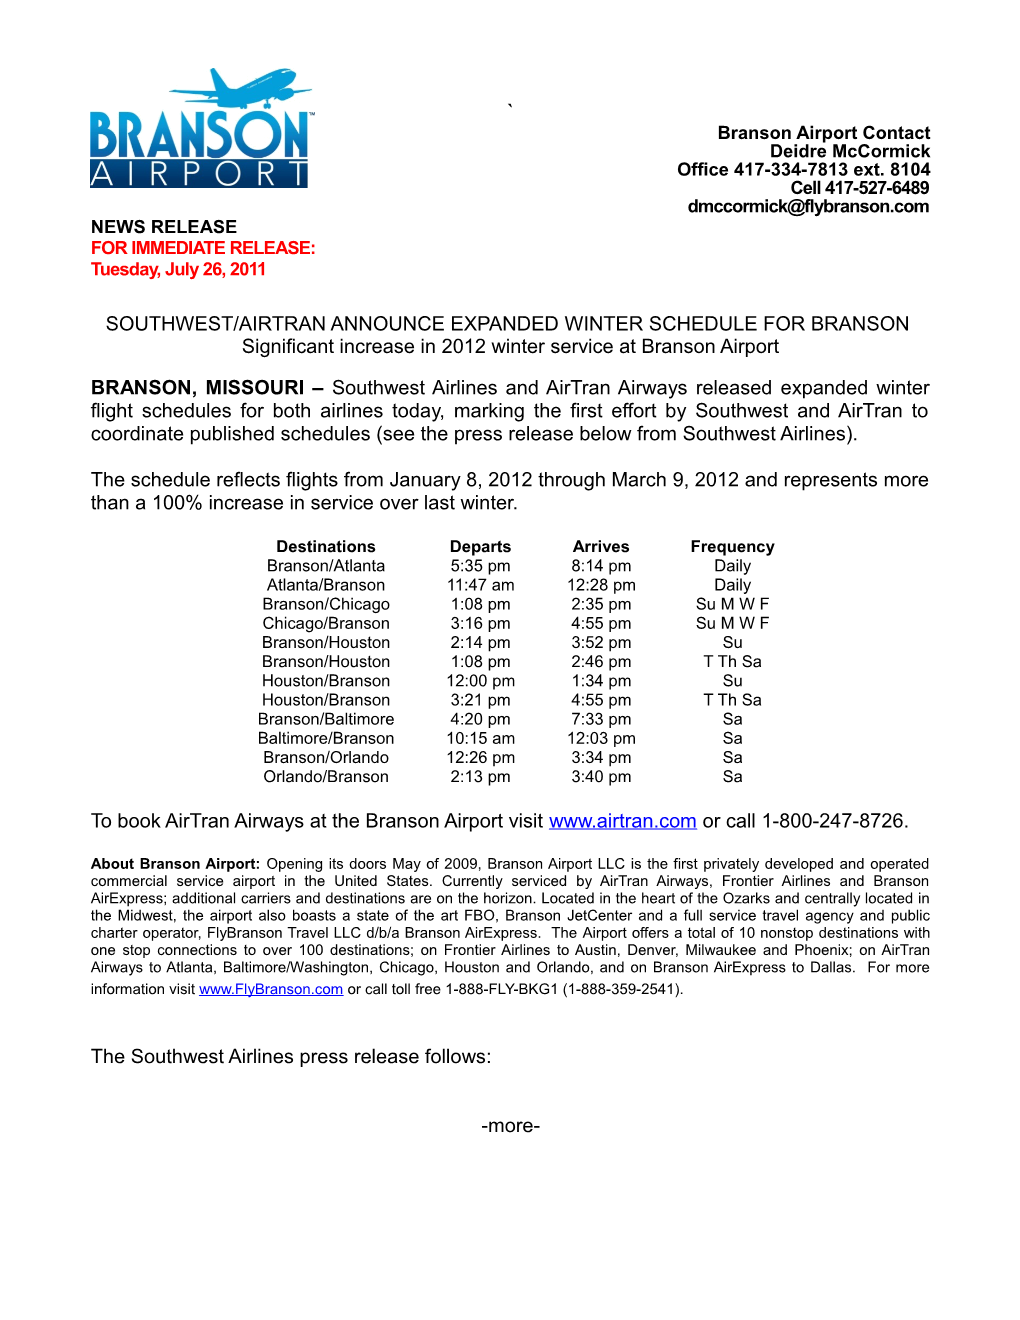 SOUTHWEST/AIRTRAN ANNOUNCE EXPANDED WINTER SCHEDULE for BRANSON Significant Increase in 2012 Winter Service at Branson Airport